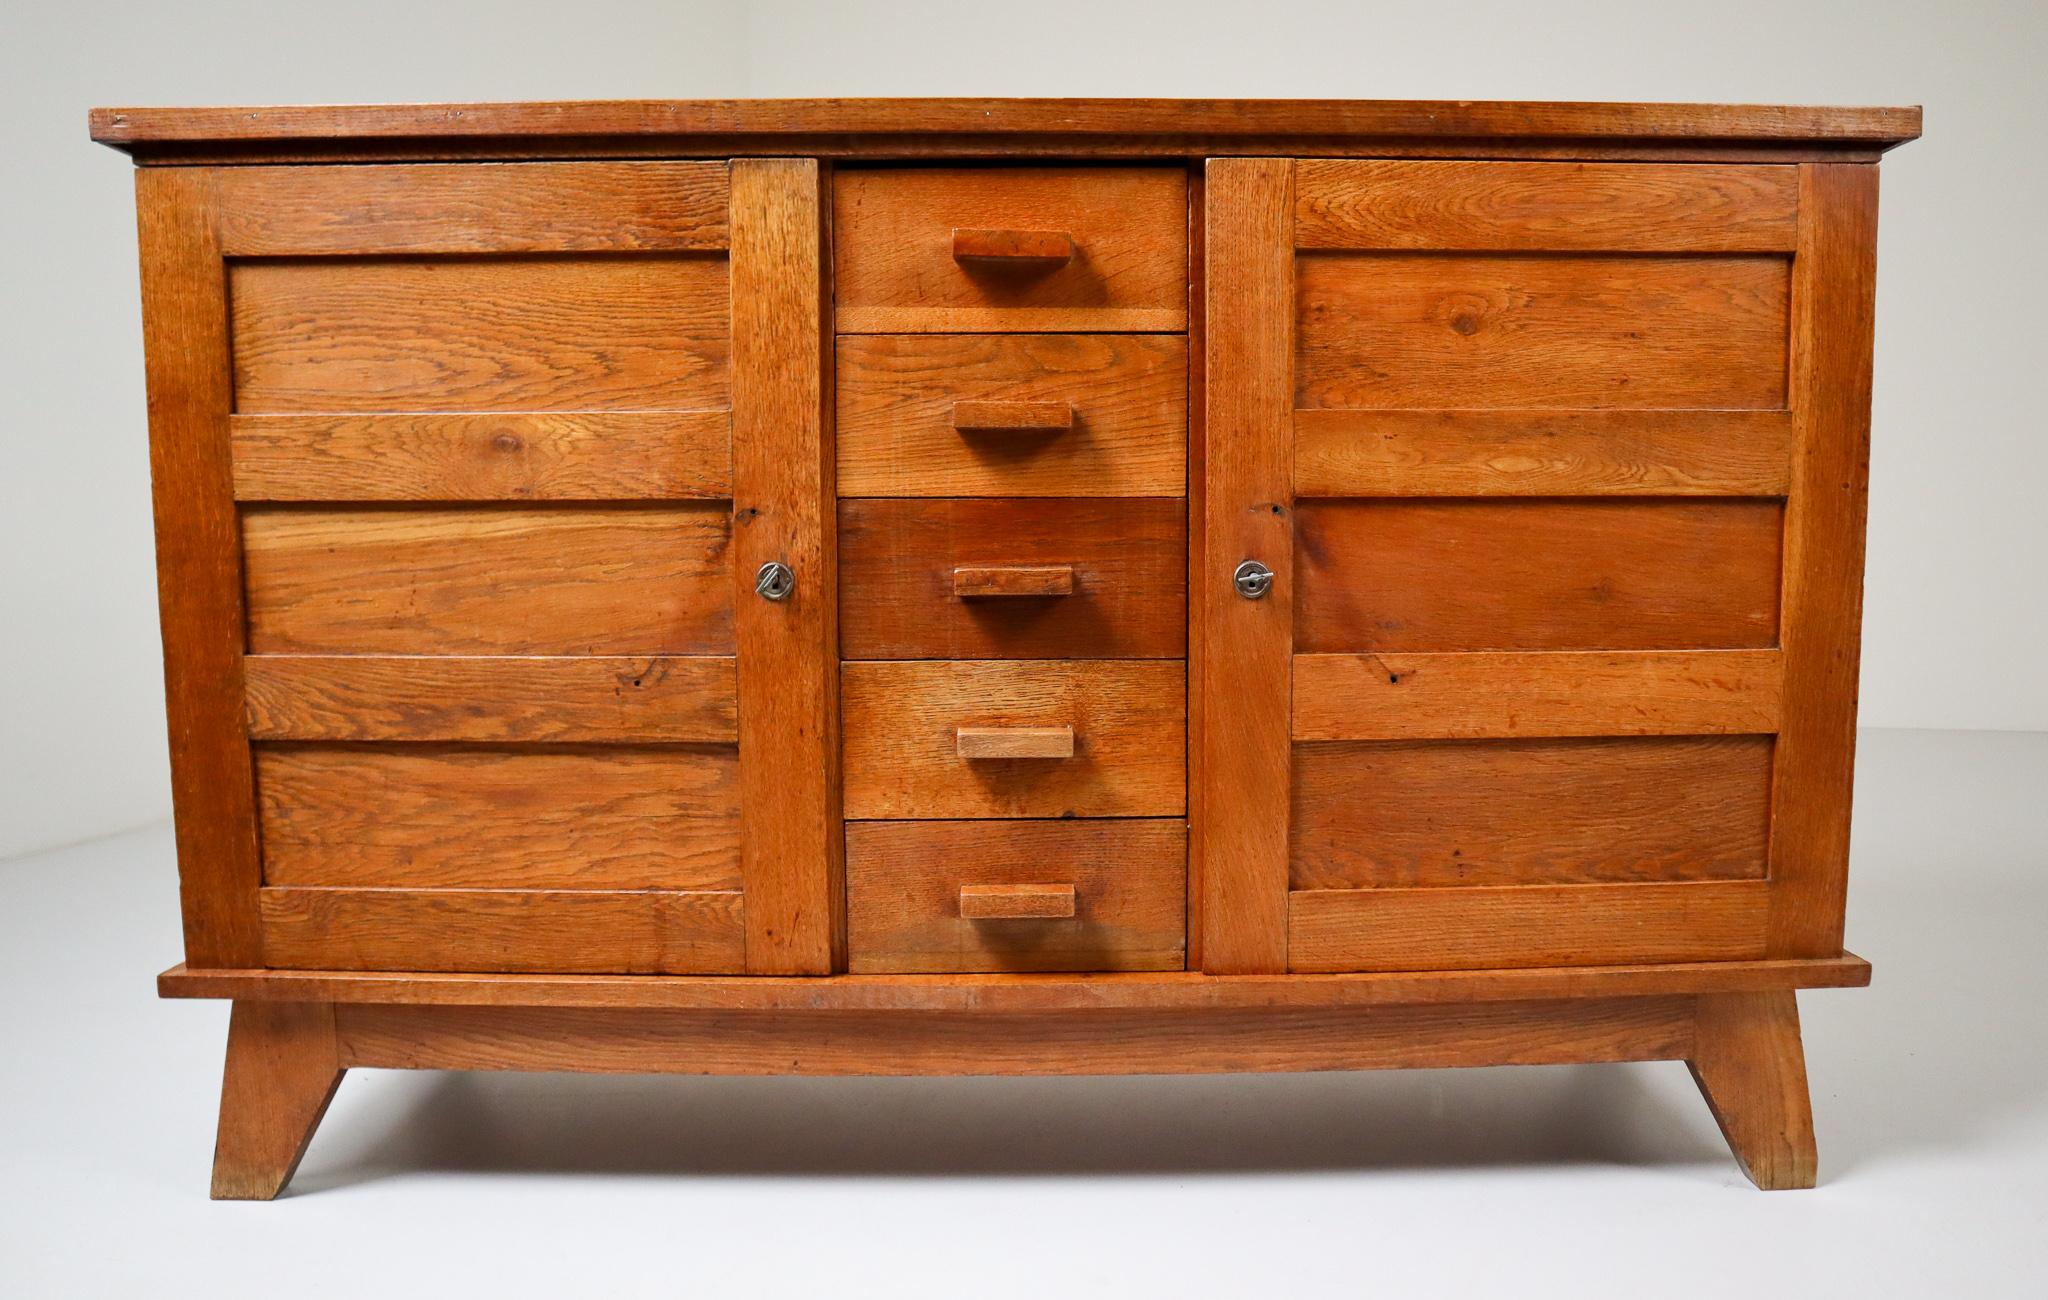 Midcentury sideboard in patinated French oak. Published in 1944 and designed by René Gabriel, this sideboard dates back to the 1950s and is a typical example of so-called reconstruction furniture. Emergency product for the victims of the war, the